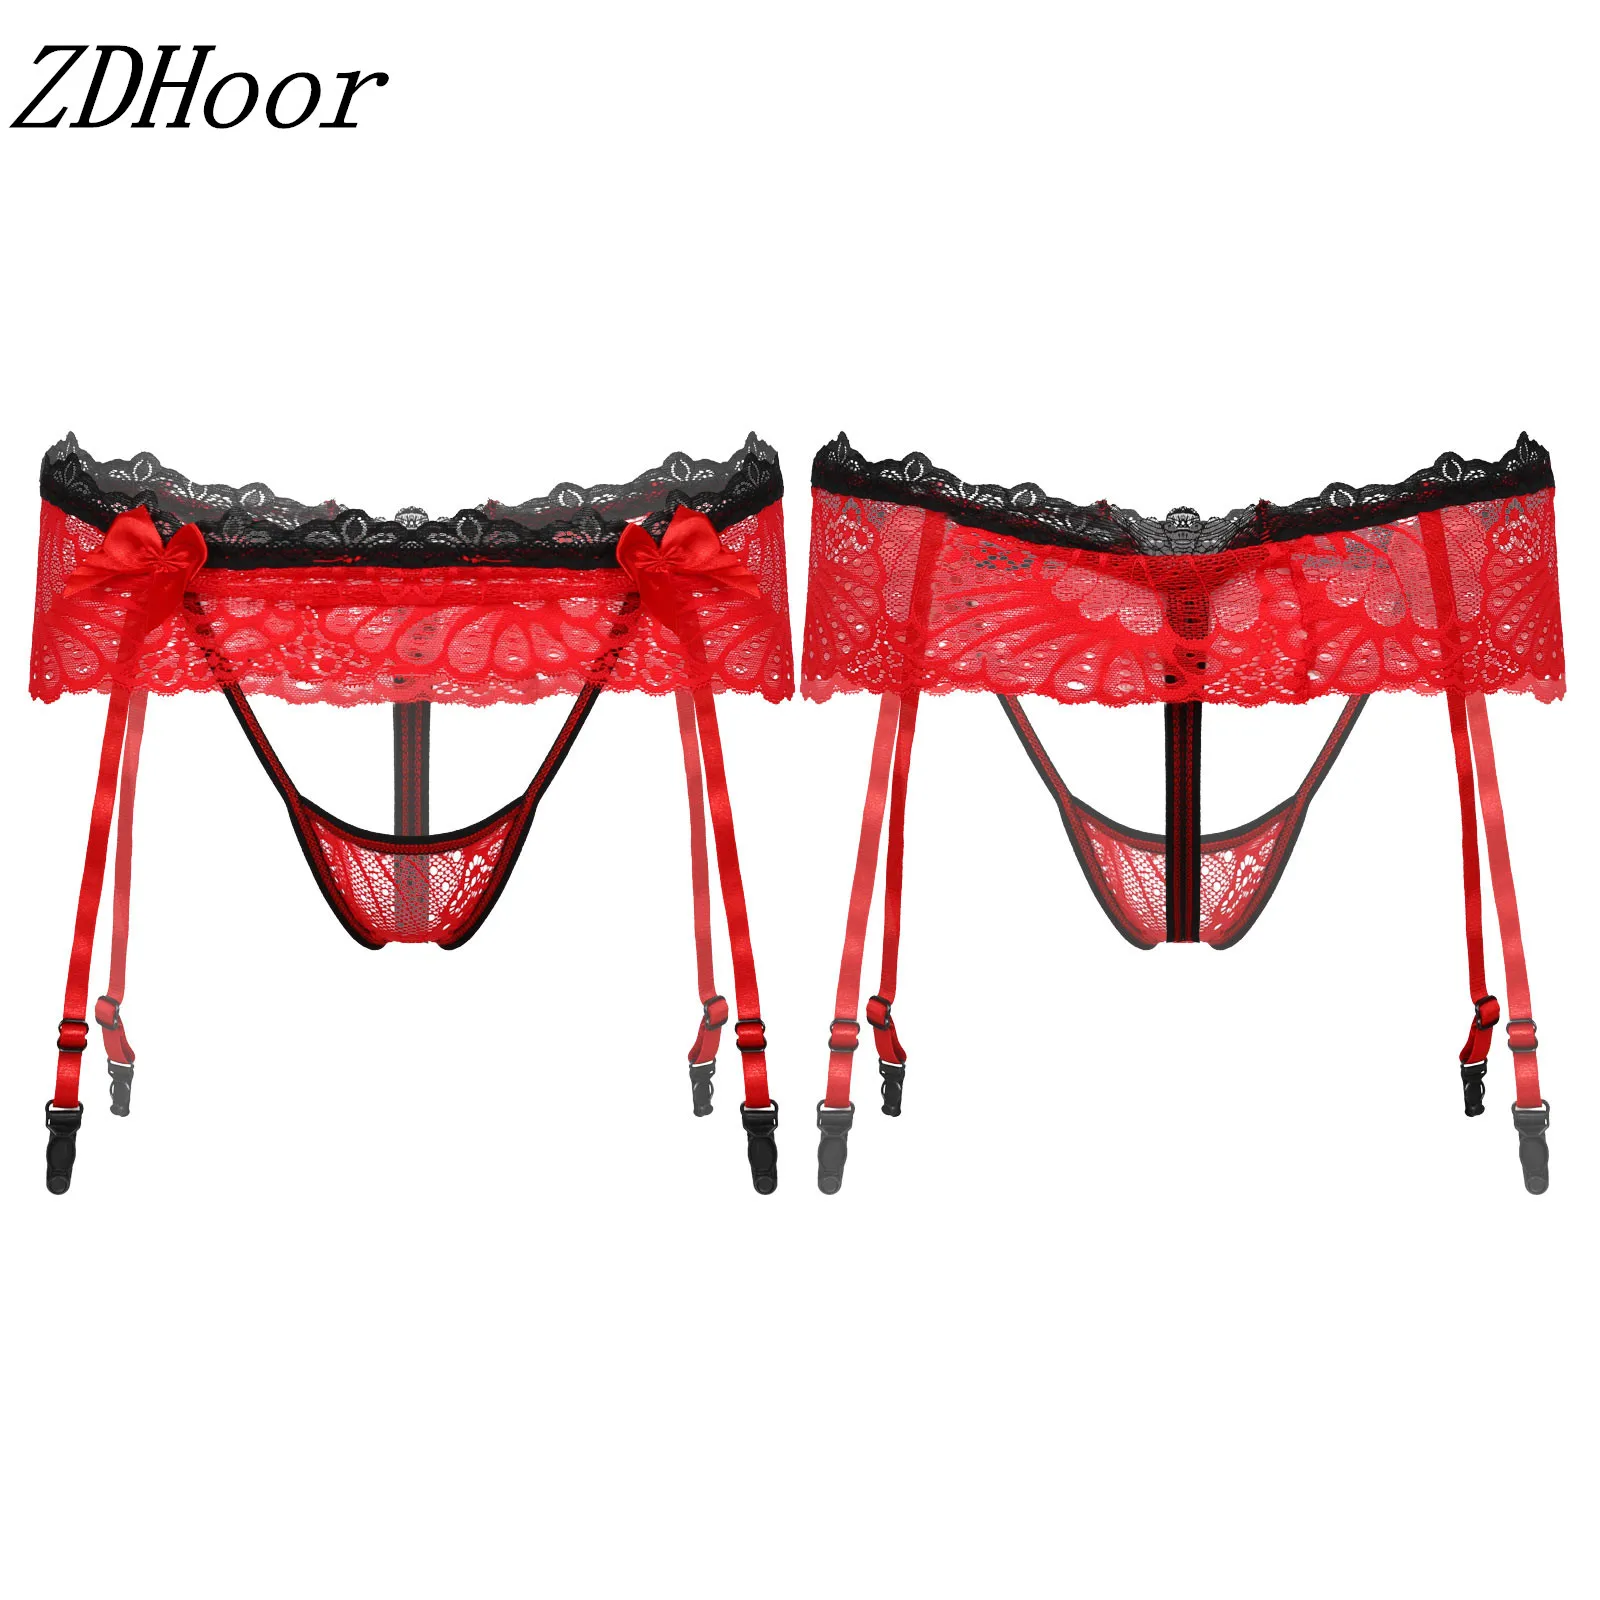 

Men Hollow Out Lace Skirted Thongs Bowknot Elastic Waistband Crotchless T-Back Adjustable Garter Belt G-String Sissy Underwear